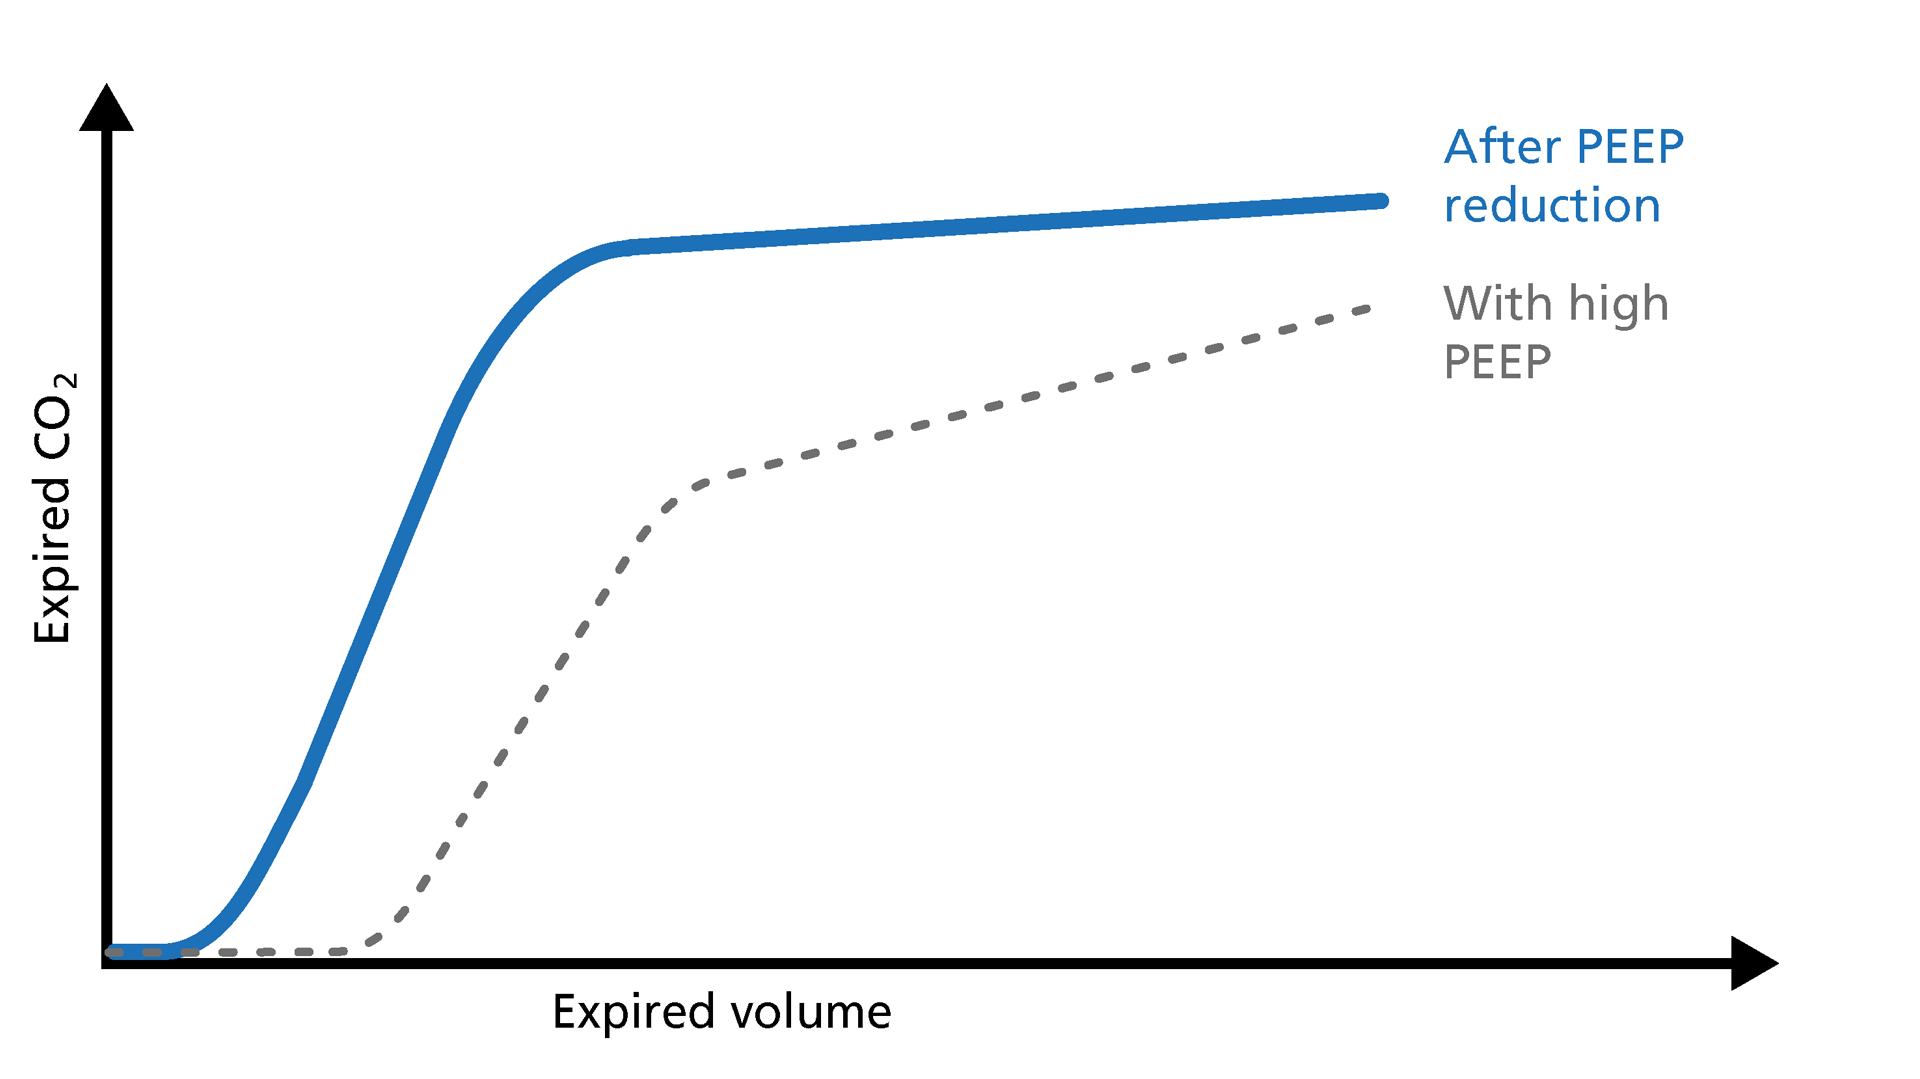 Illustration of the PEEP curve on the volumetric capnogram before and after PEEP reduction